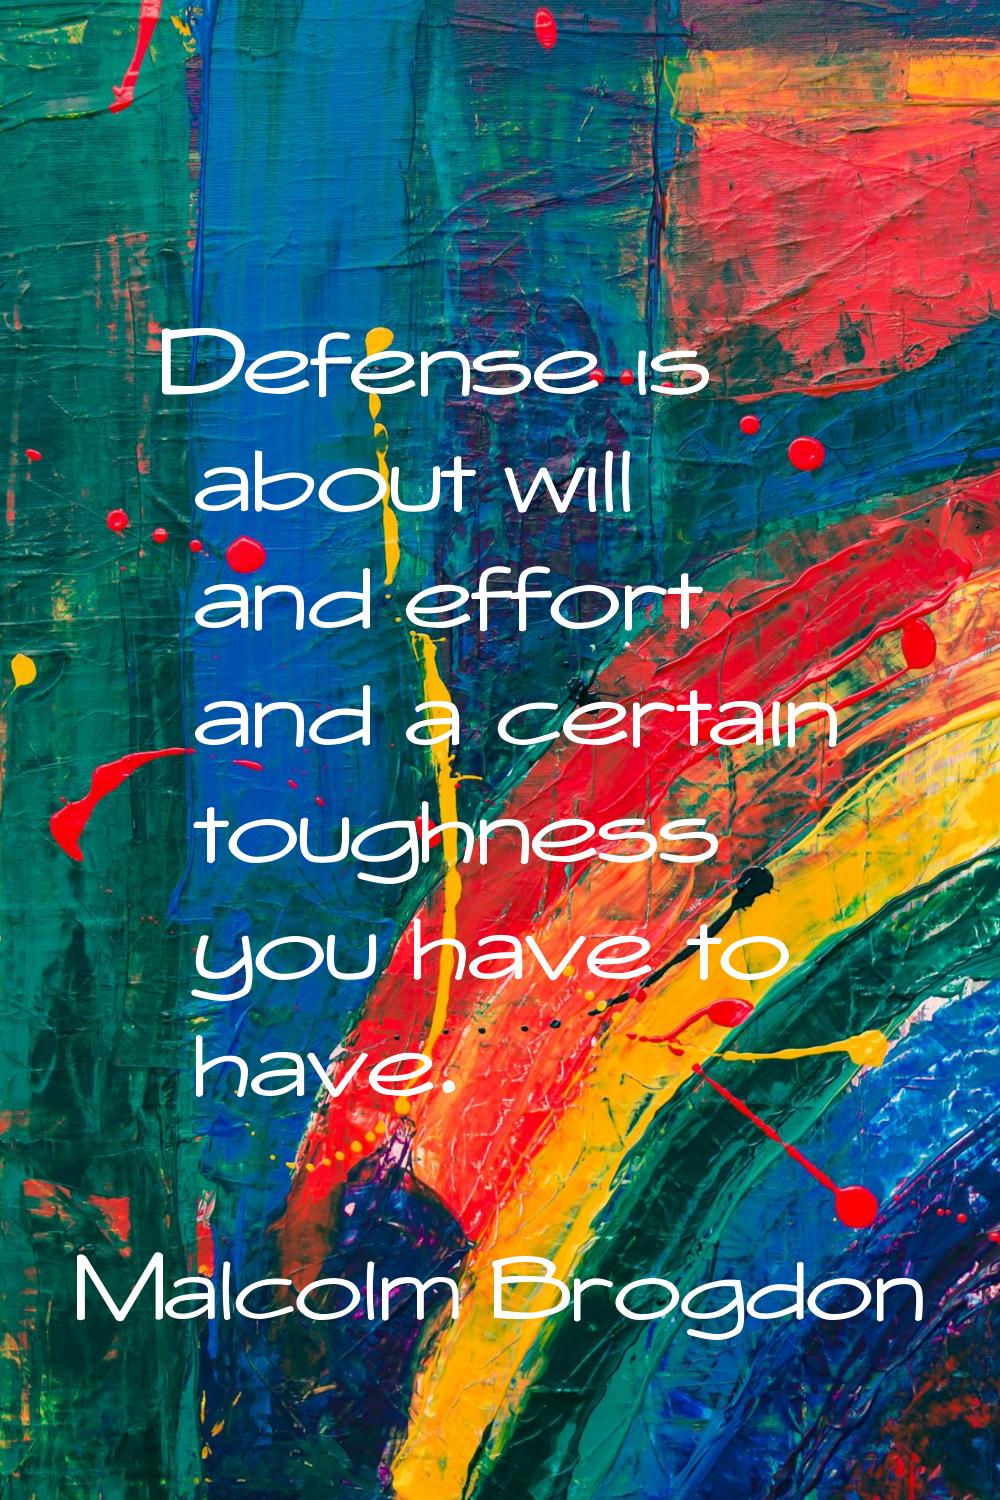 Defense is about will and effort and a certain toughness you have to have.